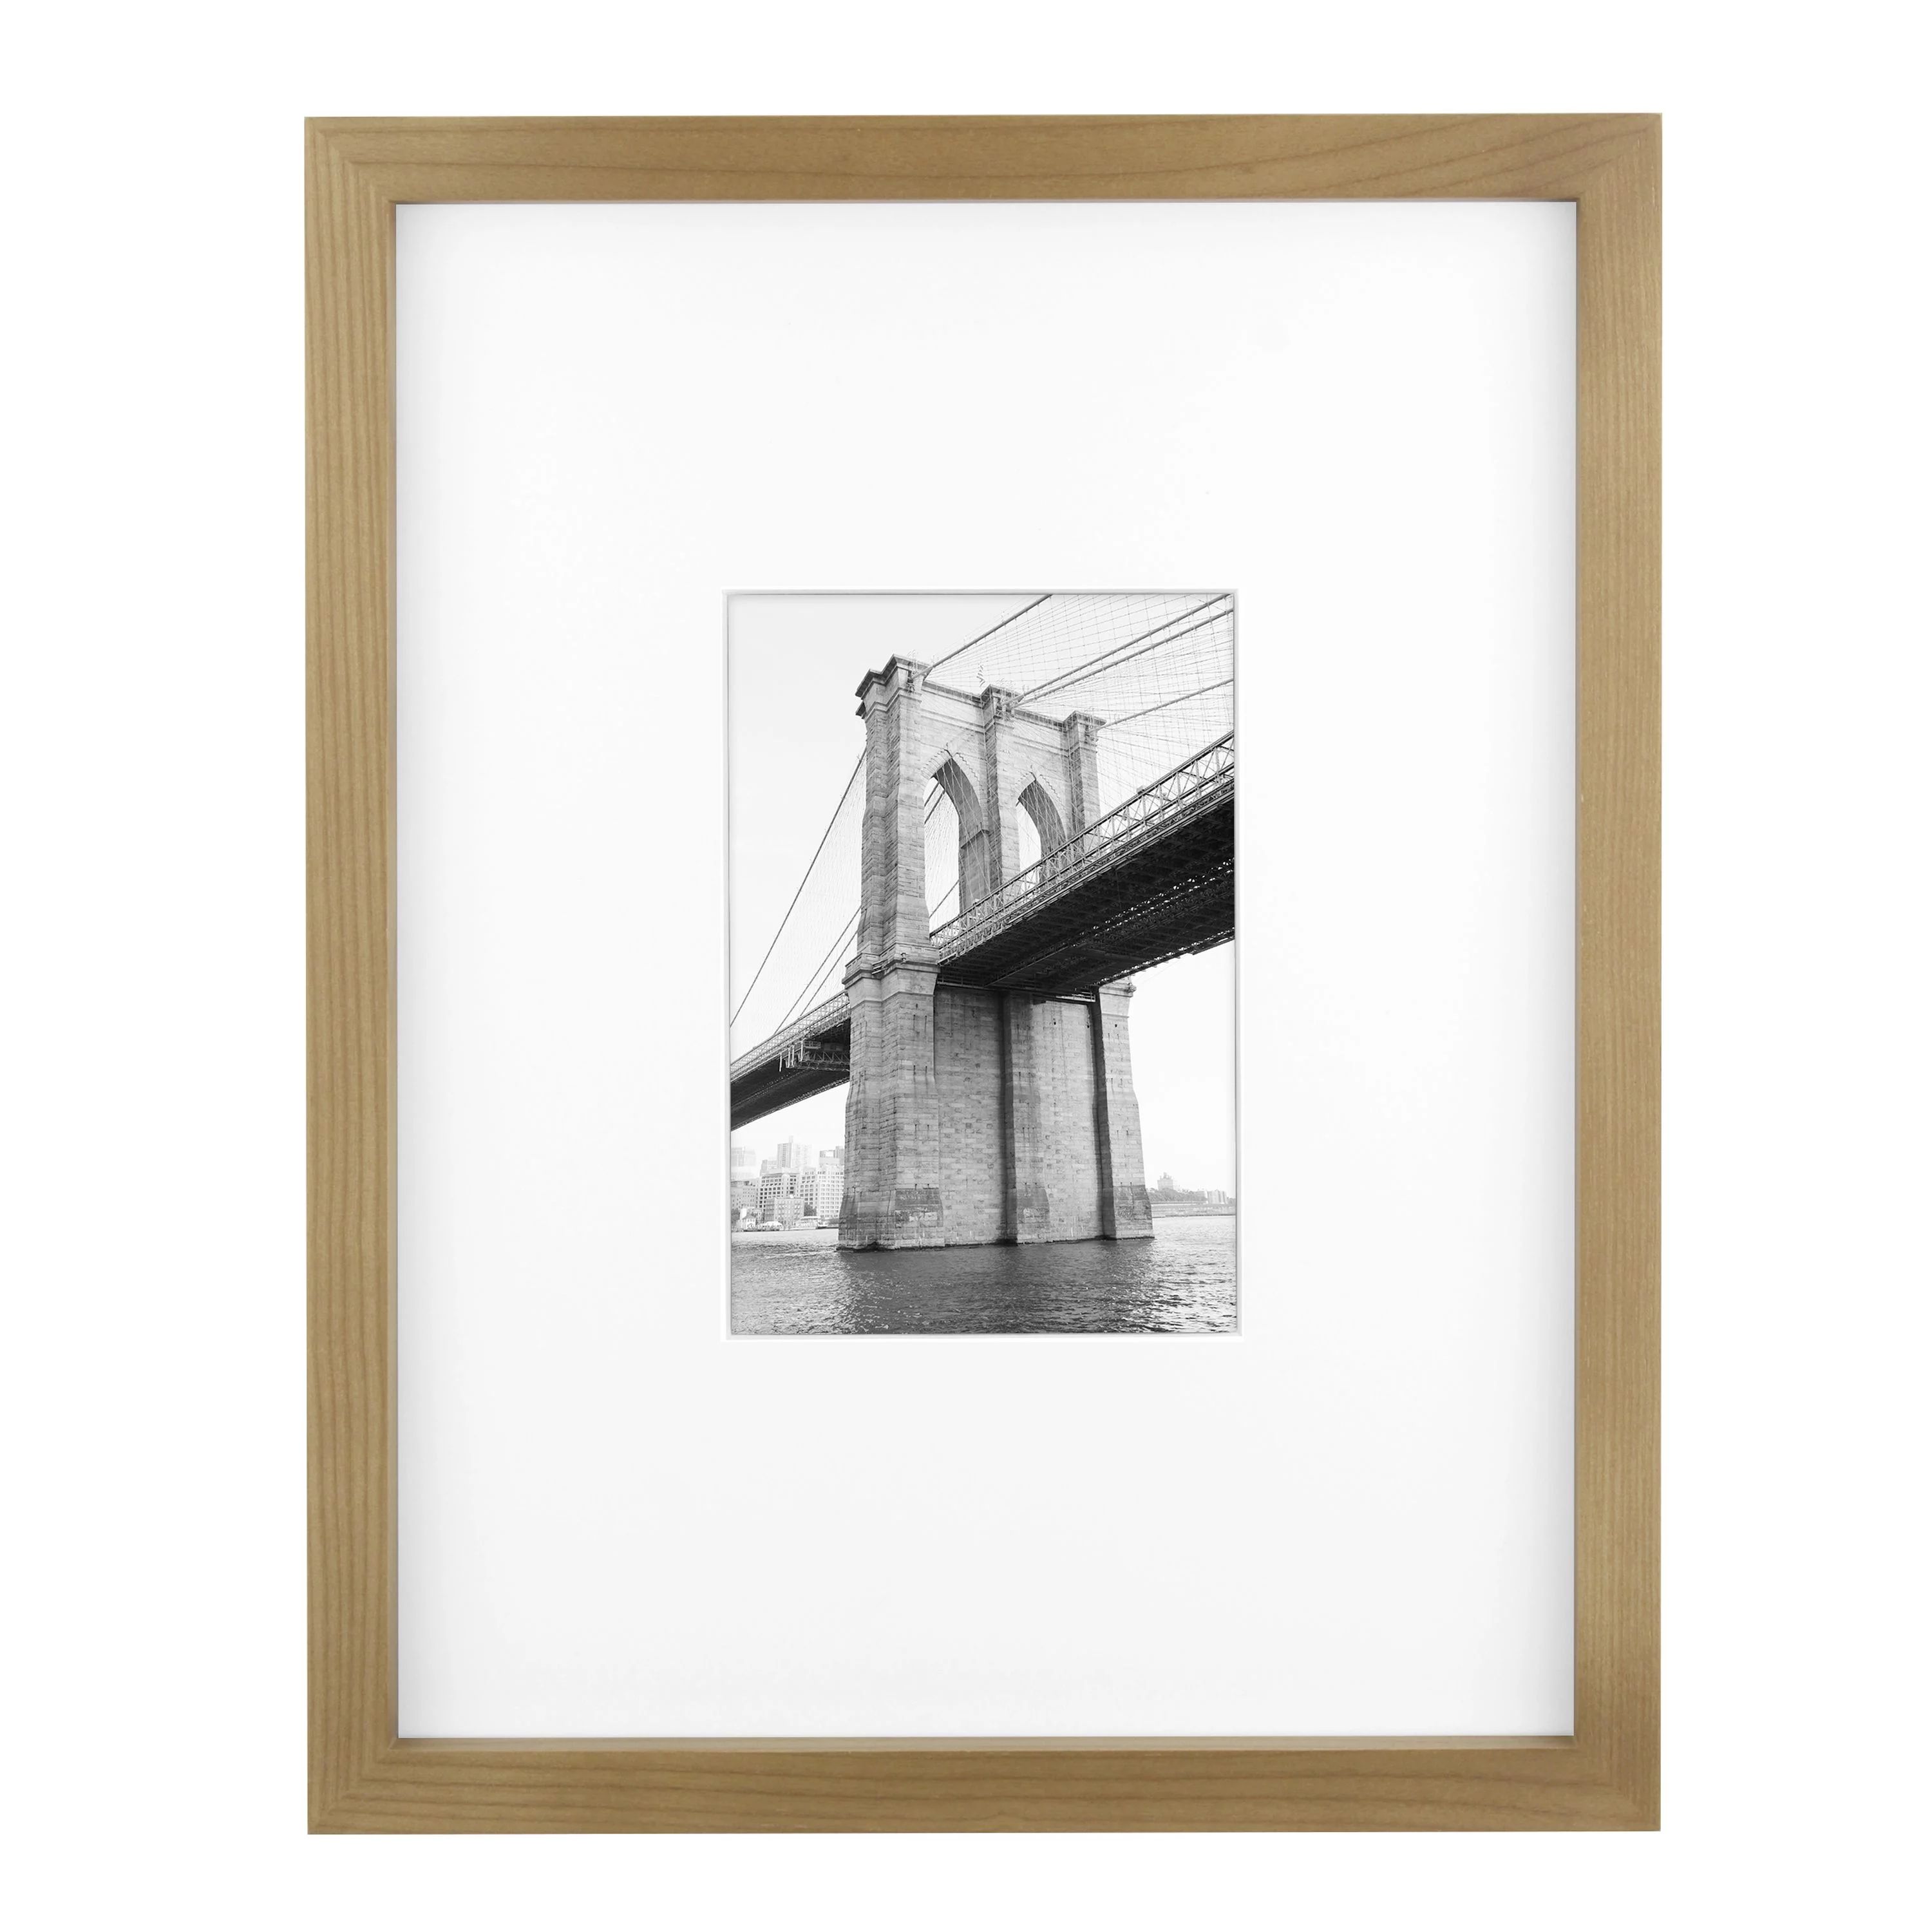 Better Homes & Gardens 11x14 matted to 5x7 Wood Wall Picture Frame, Brown | Walmart (US)